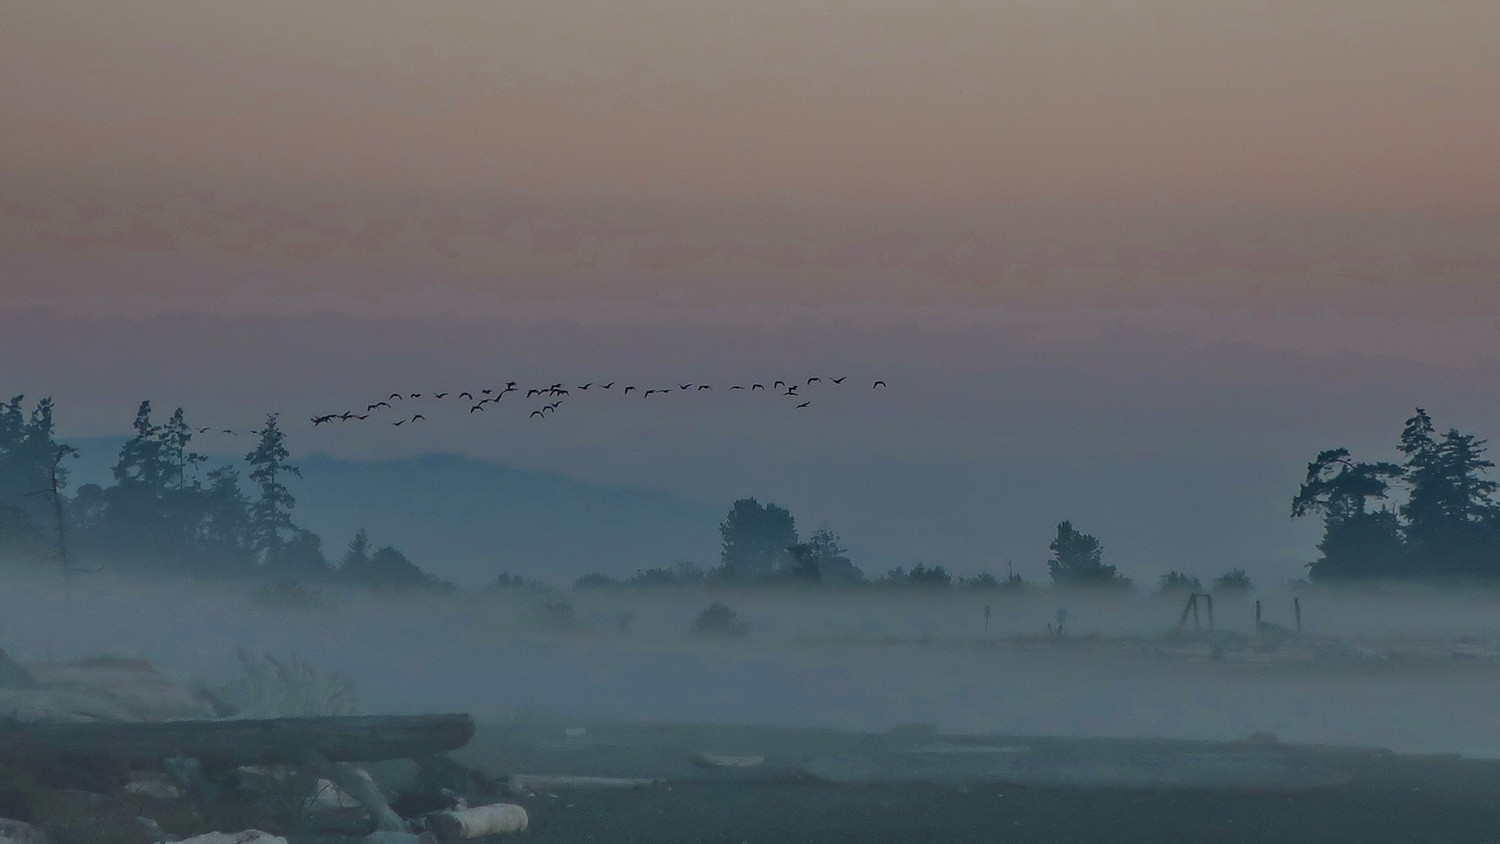 Flying birds early in the morning